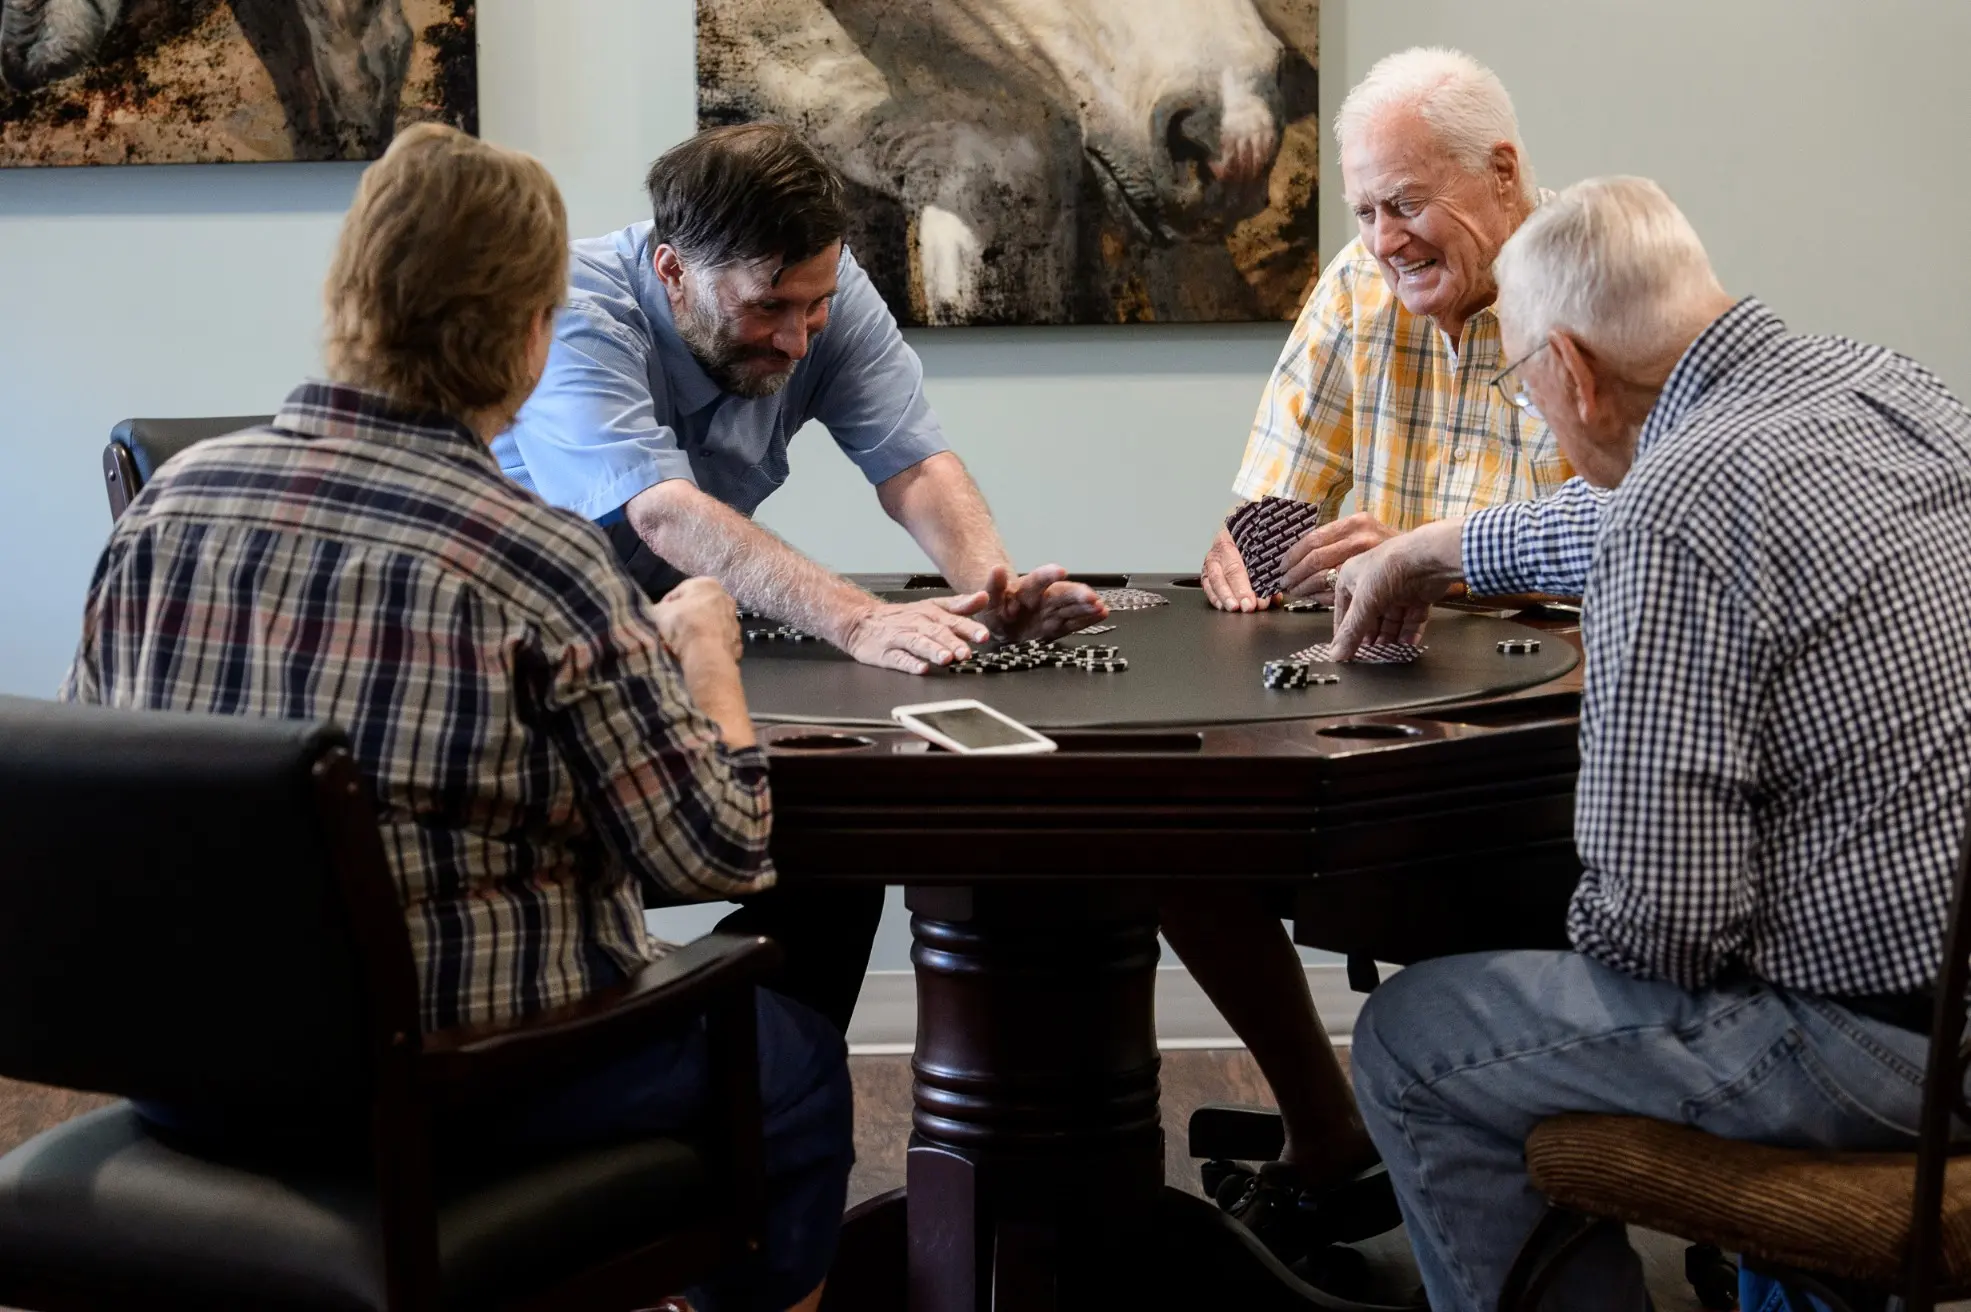 Seniors playing cards in the activity room of a senior living community in Niceville, FL